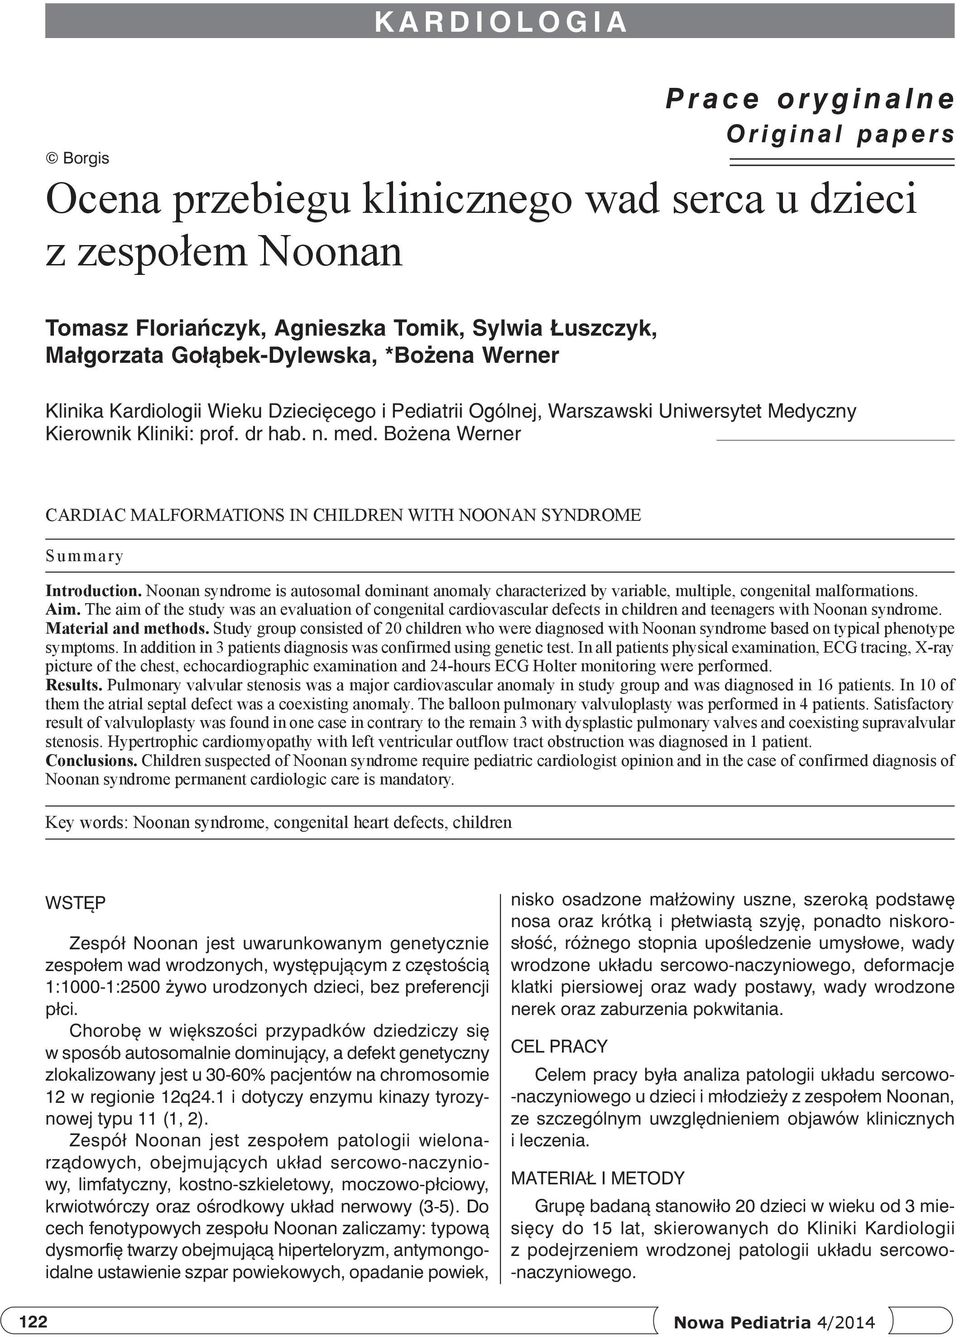 Bożena Werner Cardiac malformations in children with Noonan syndrome Summary Introduction. Noonan syndrome is autosomal dominant anomaly characterized by variable, multiple, congenital malformations.